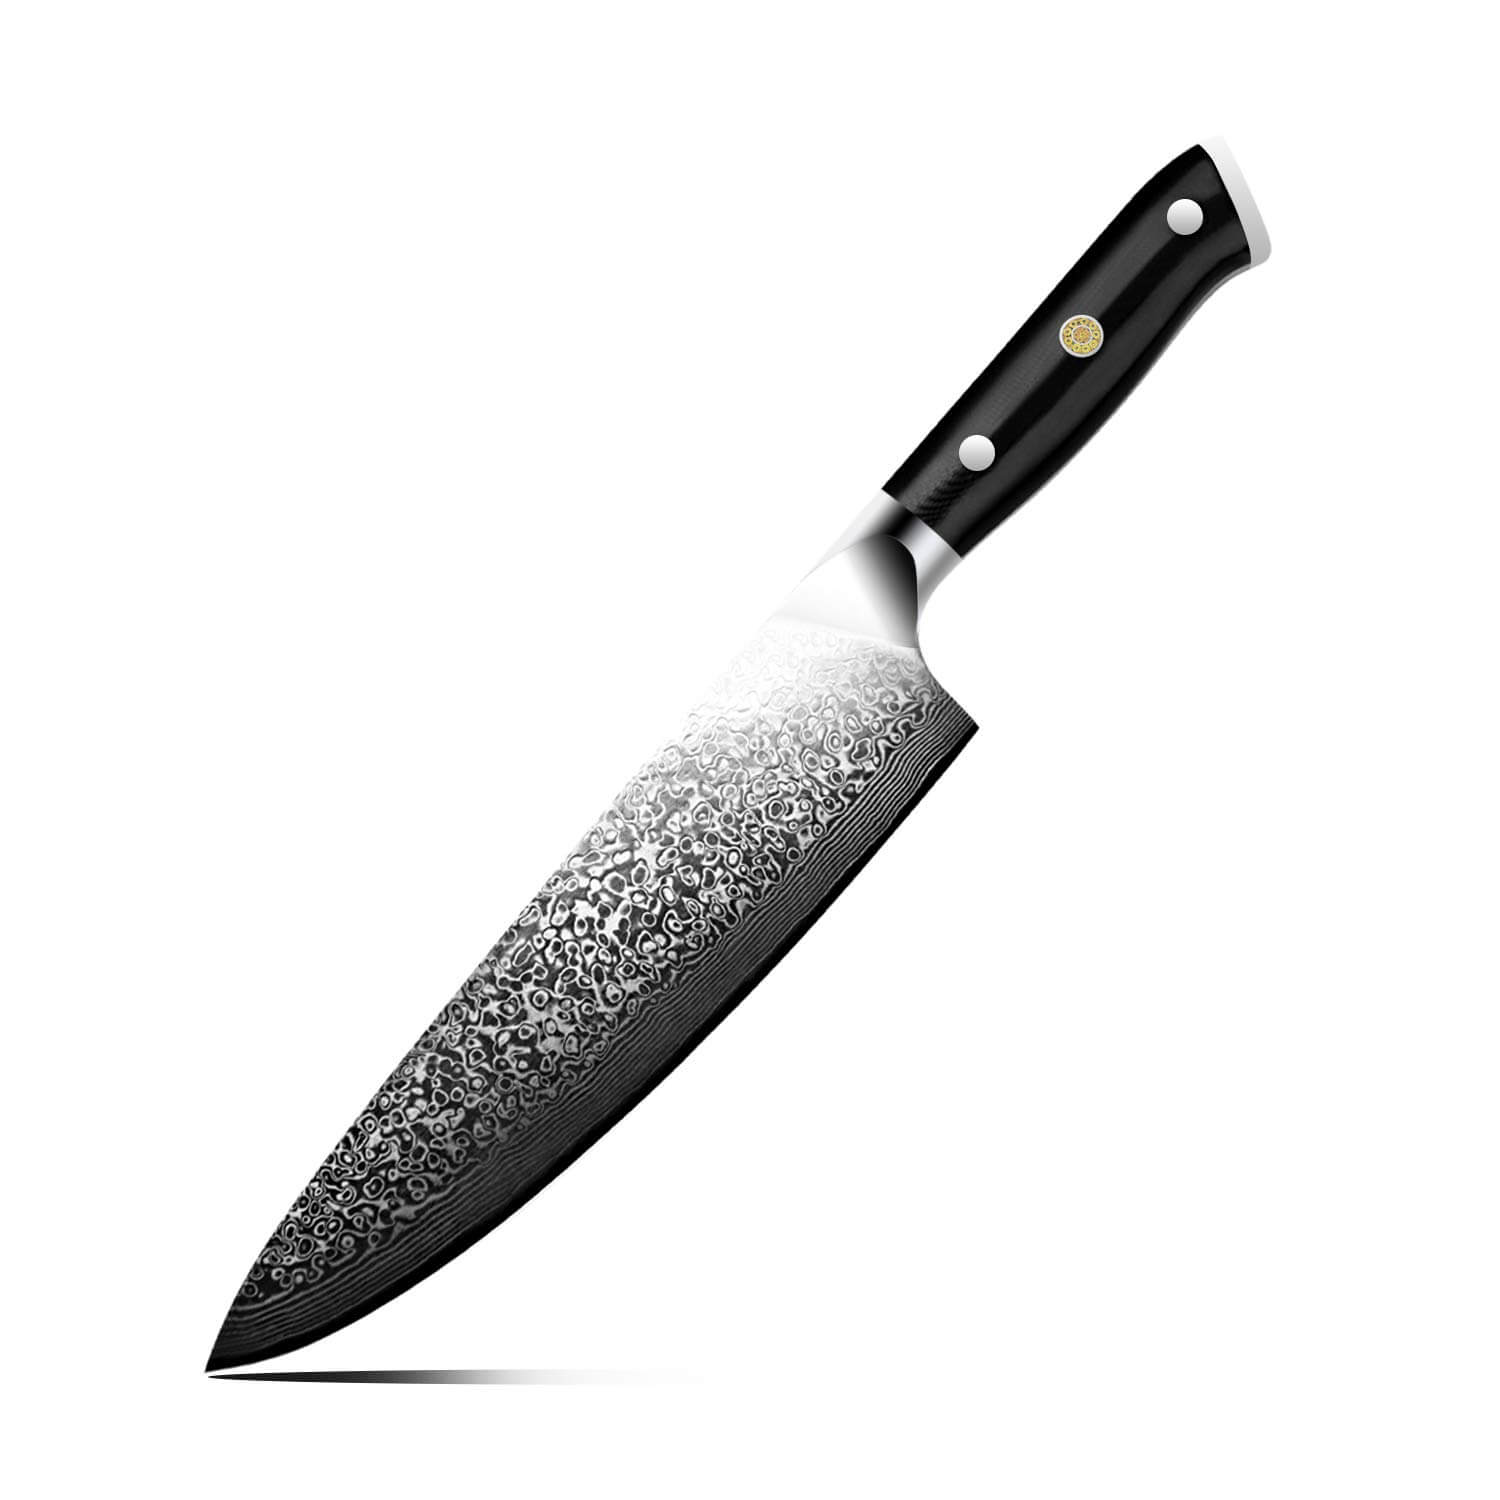 LEVINCHY Chefs Knife 8 Inch Professional Japanese Damascus Stainless Steel Kitchen Knife 